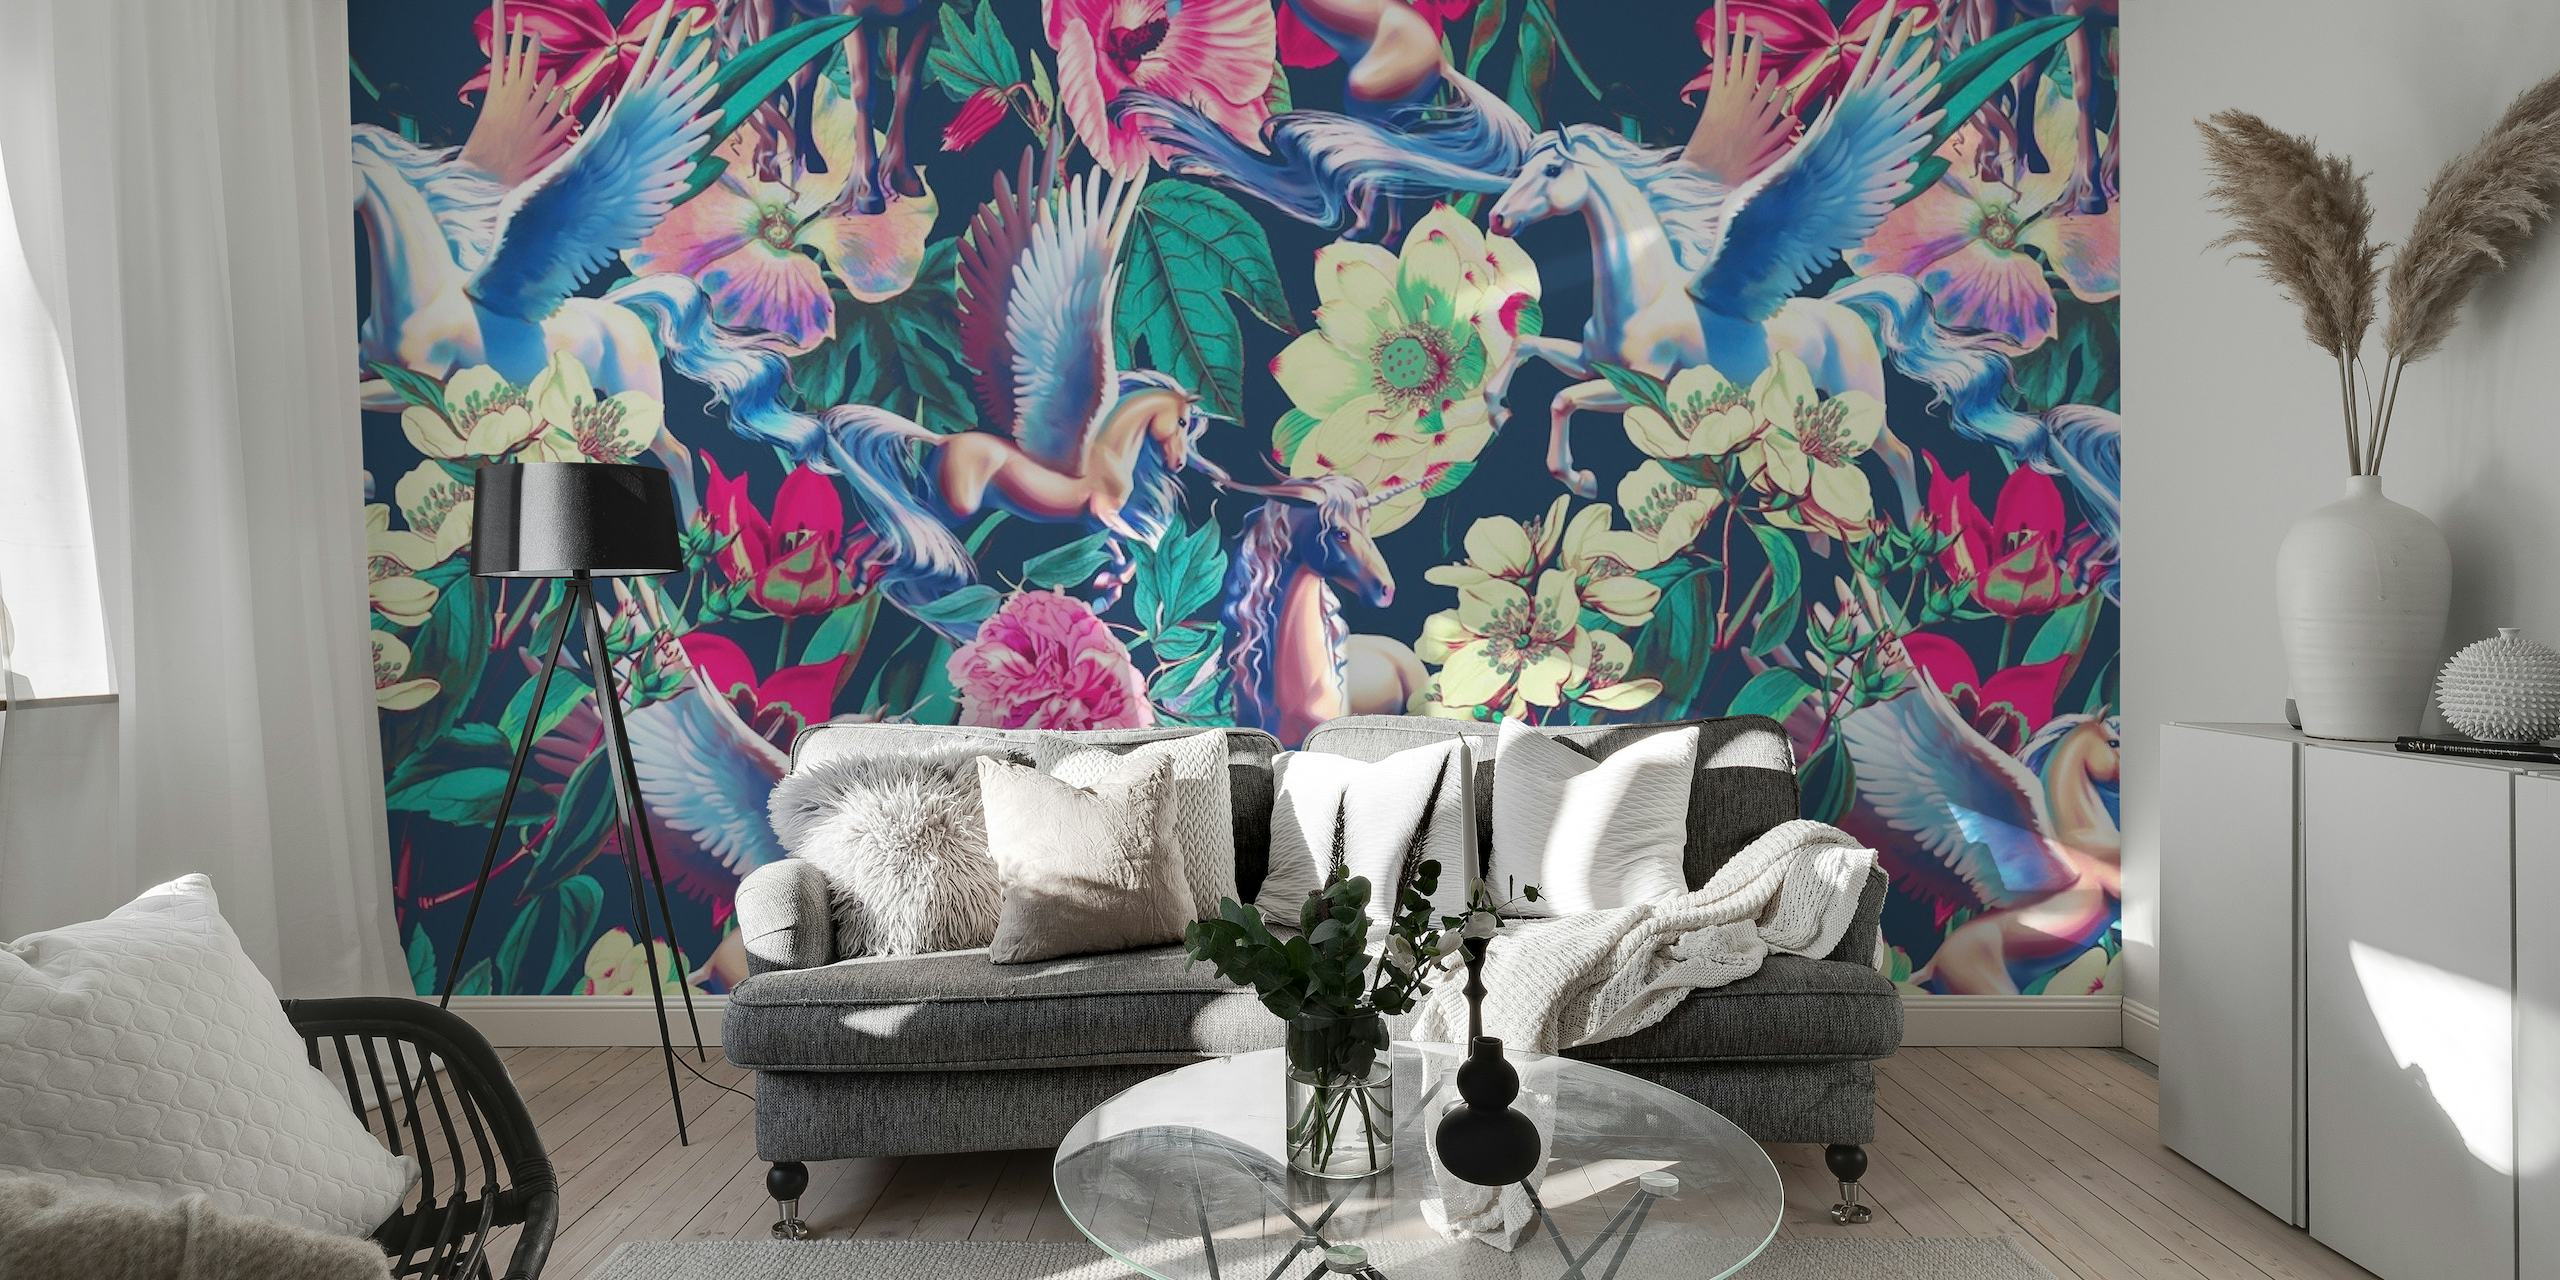 Unicorn and Floral Pattern wallpaper